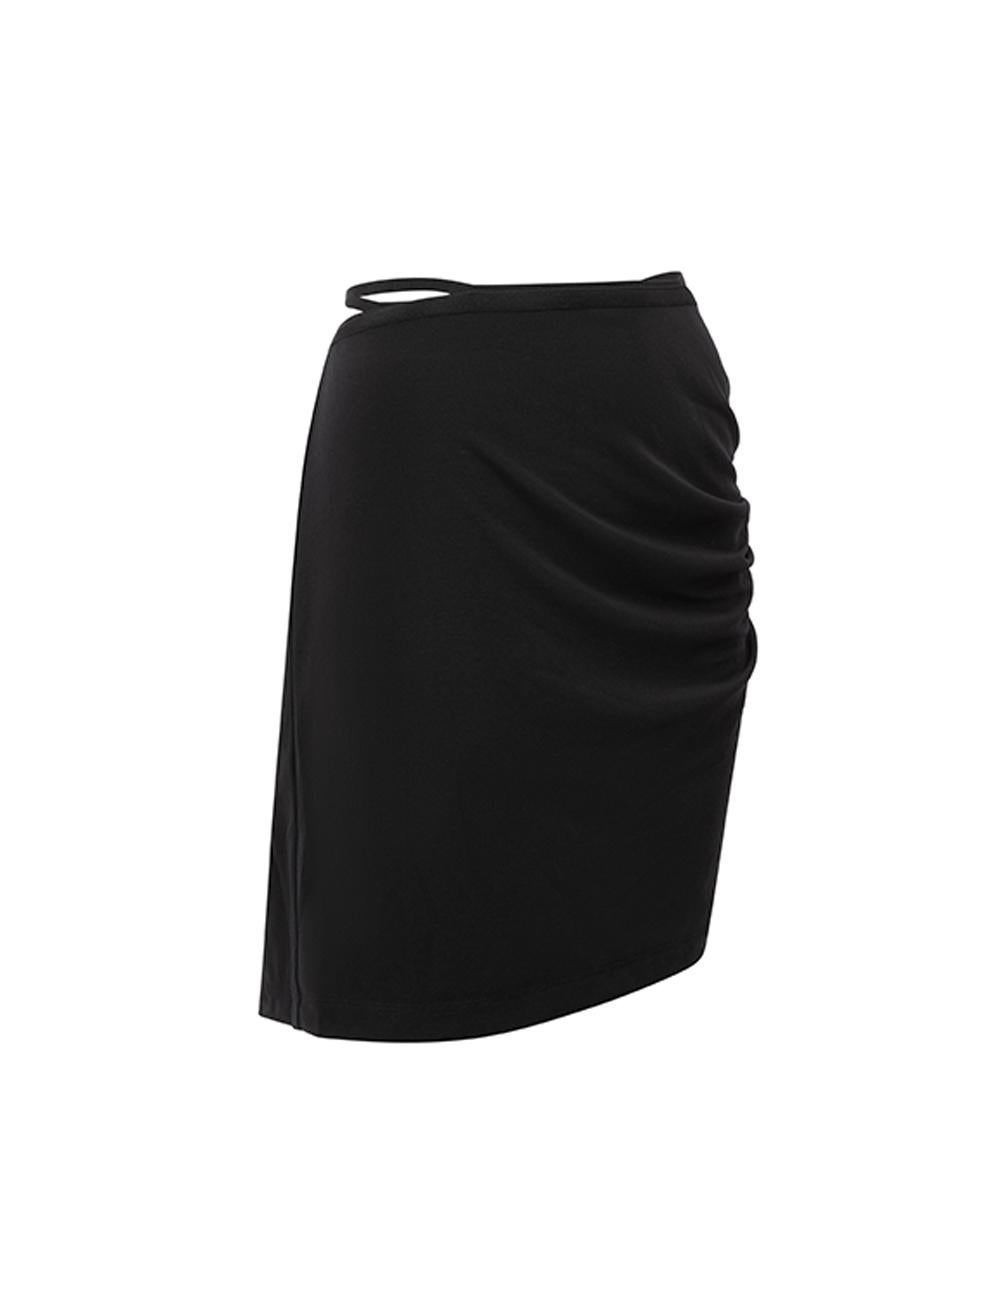 CONDITION is Never worn, with tags. No visible wear to skirt is evident on this new Helmut Lang designer resale item.



Details


Black

Polyester

Mini skirt

Twist ruched accent

Straps on waistline

Stretchy





Made in